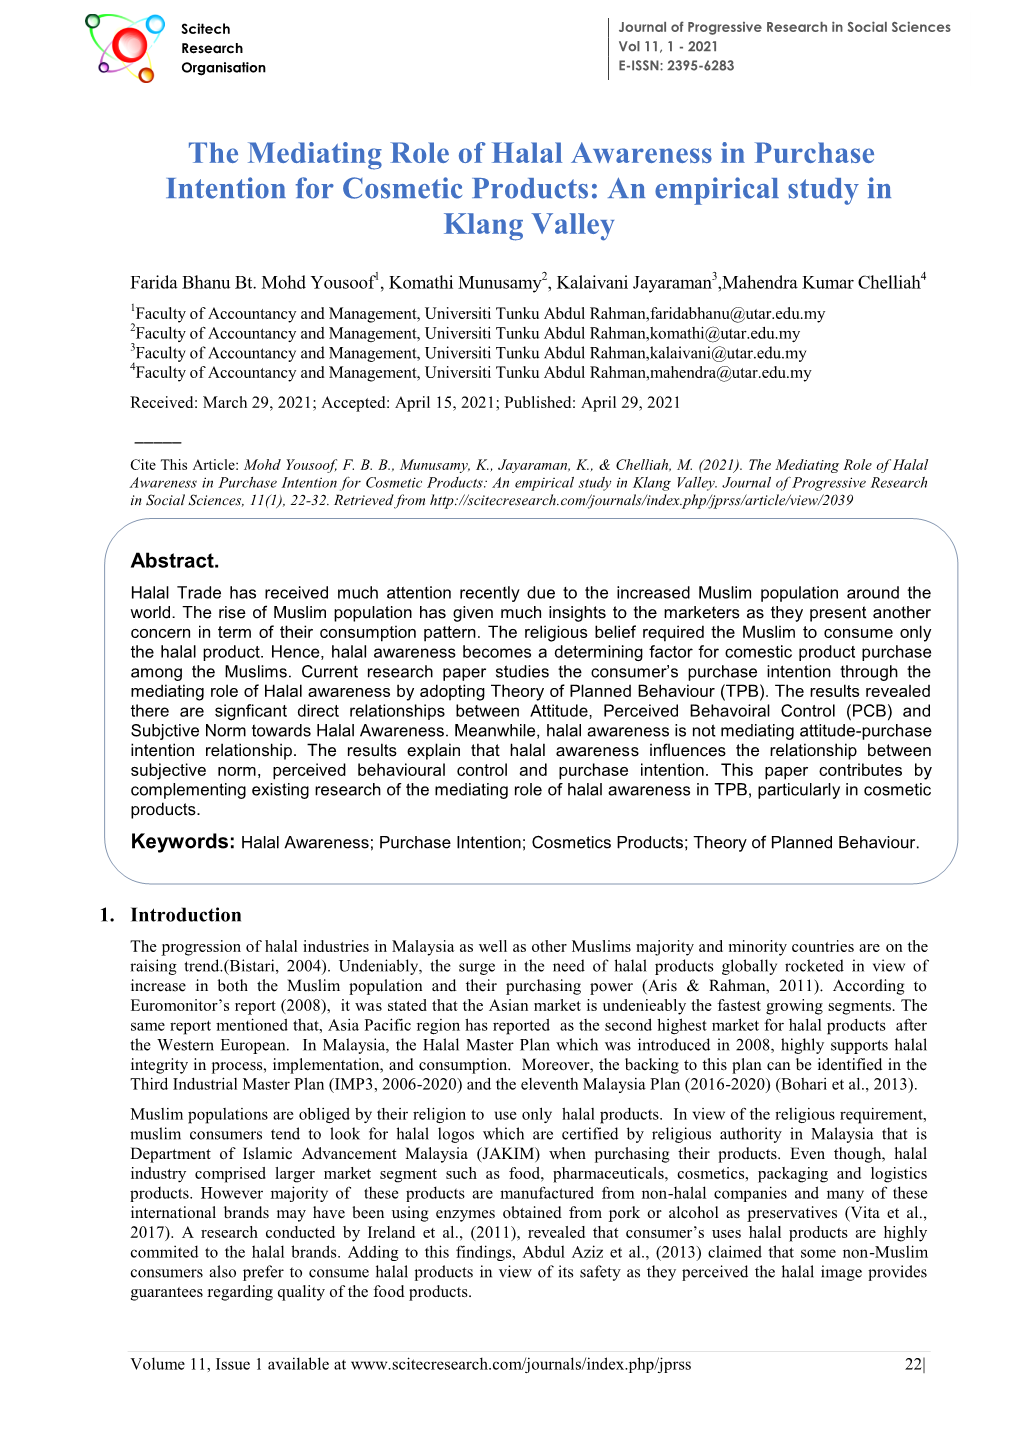 The Mediating Role of Halal Awareness in Purchase Intention for Cosmetic Products: an Empirical Study in Klang Valley